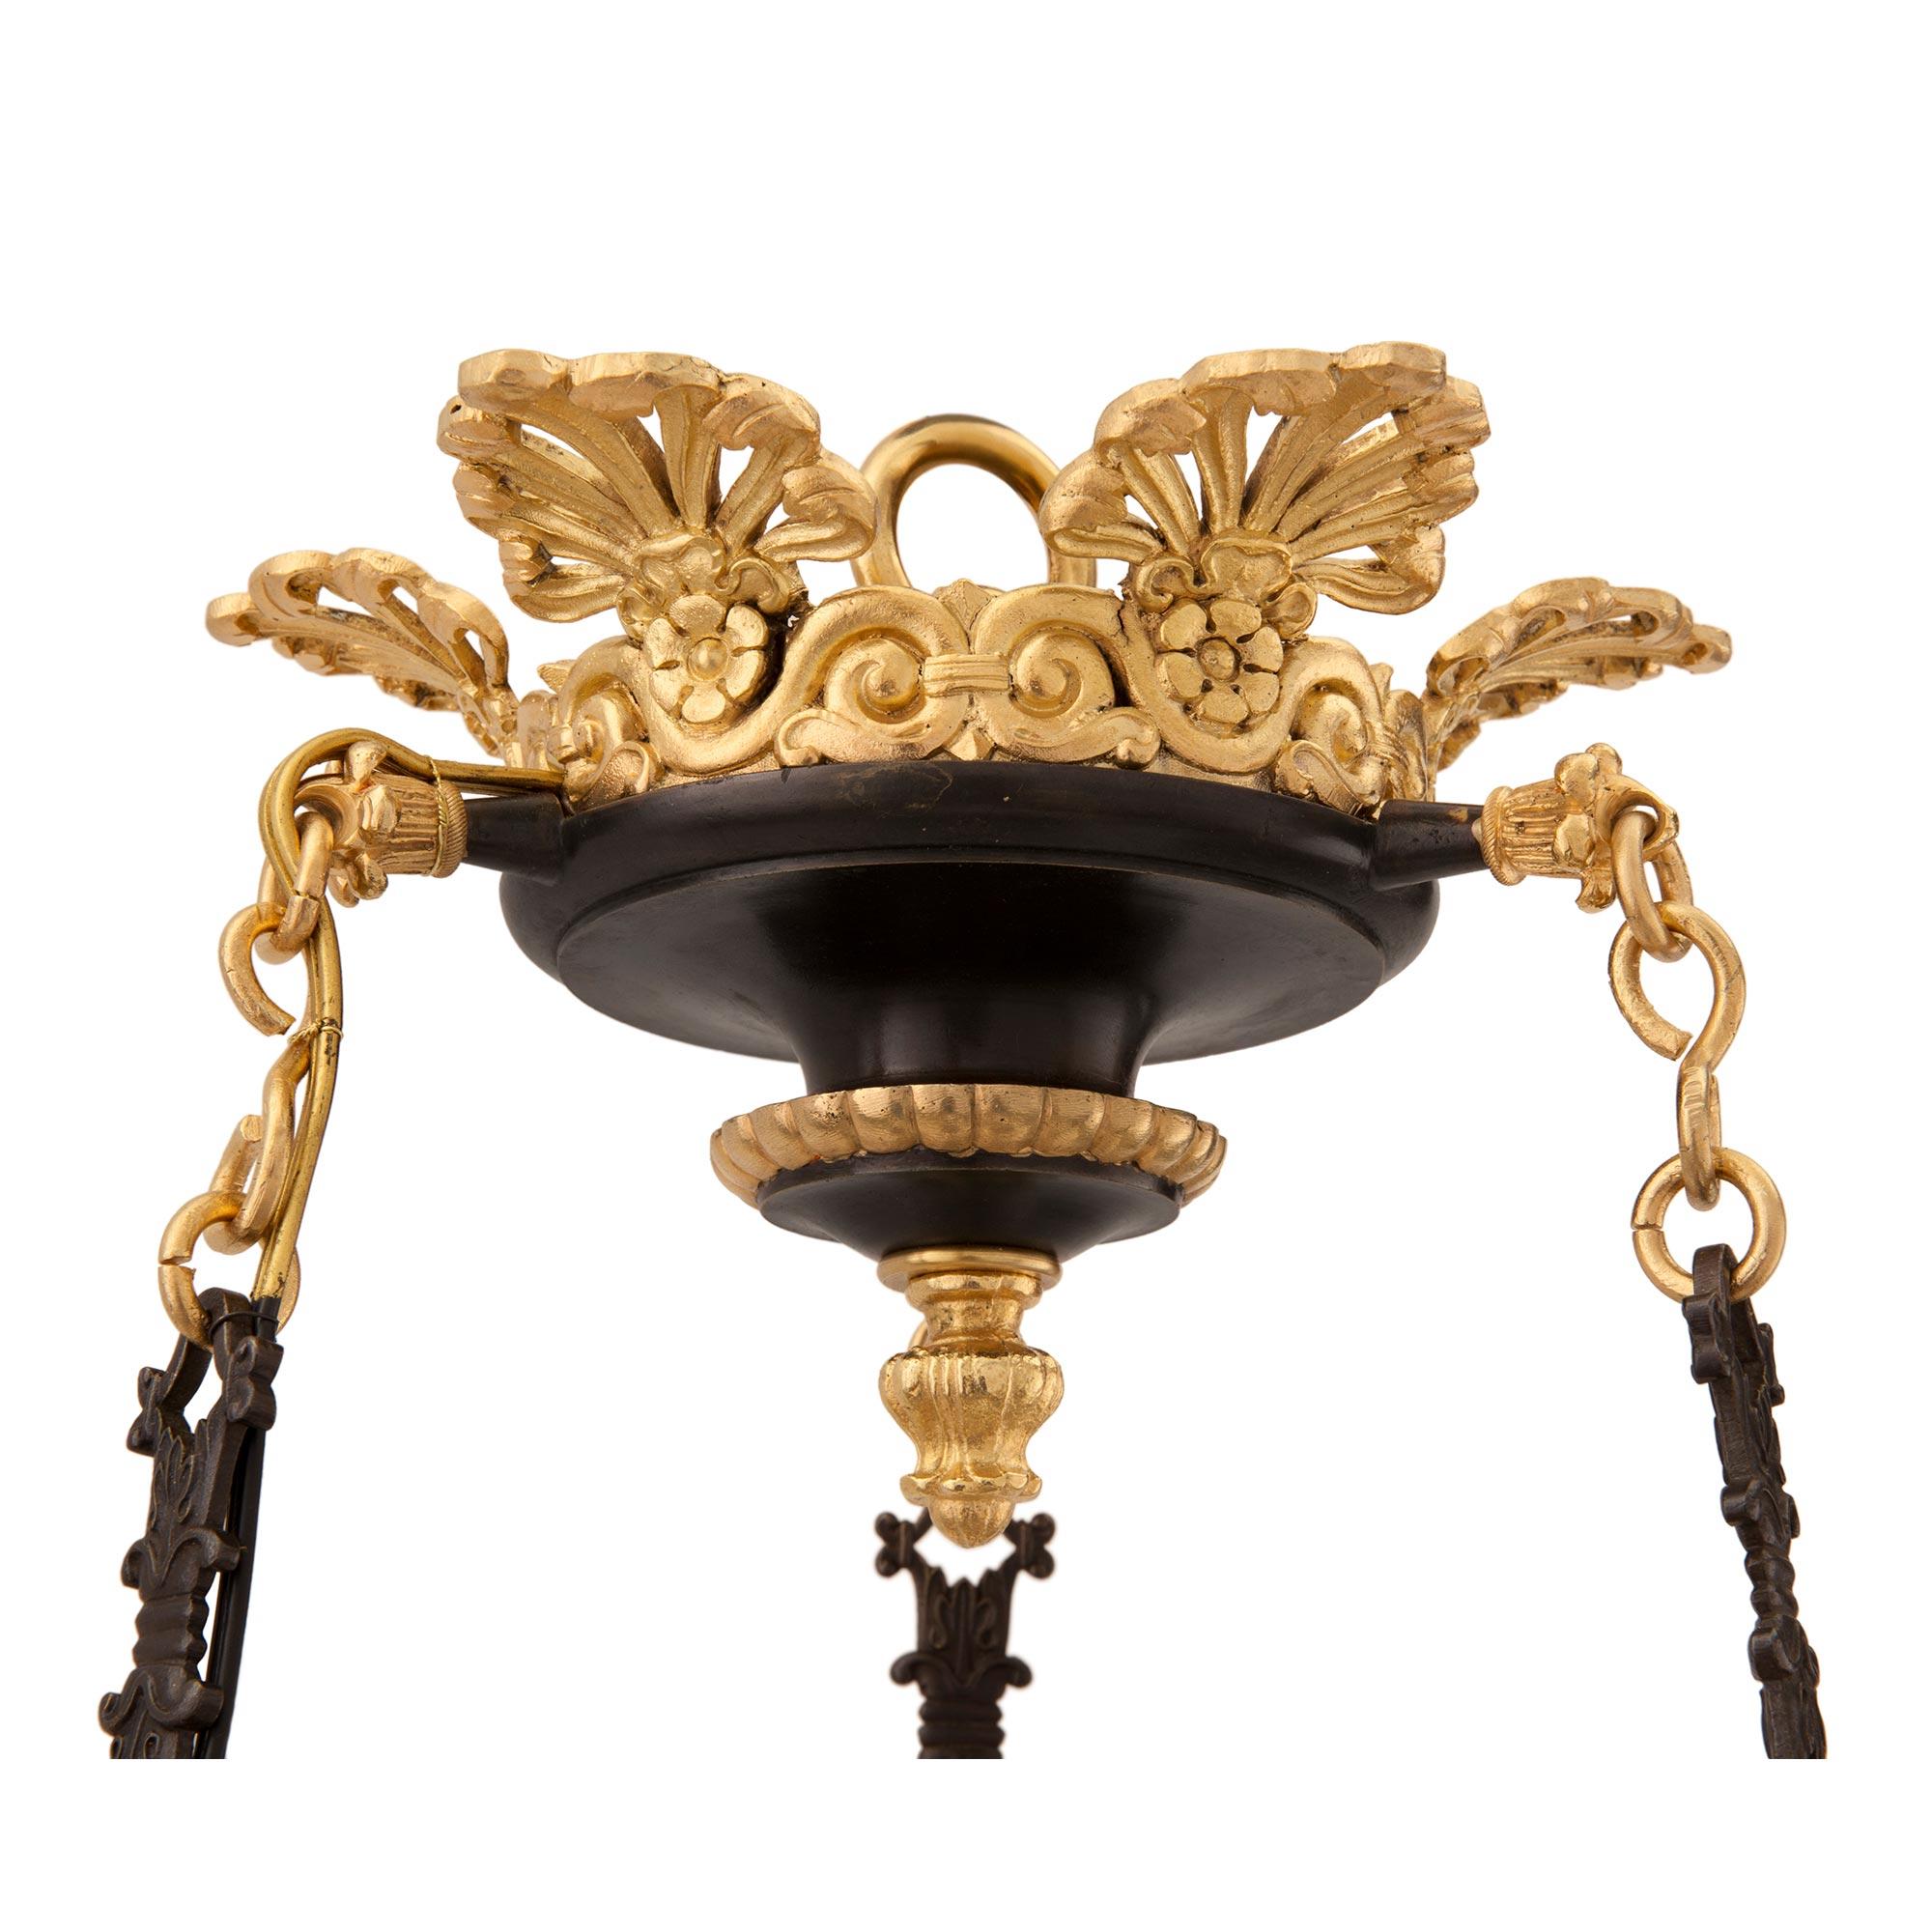 French 19th Century Empire Style Patinated Bronze and Ormolu Six-Arm Chandelier In Good Condition For Sale In West Palm Beach, FL